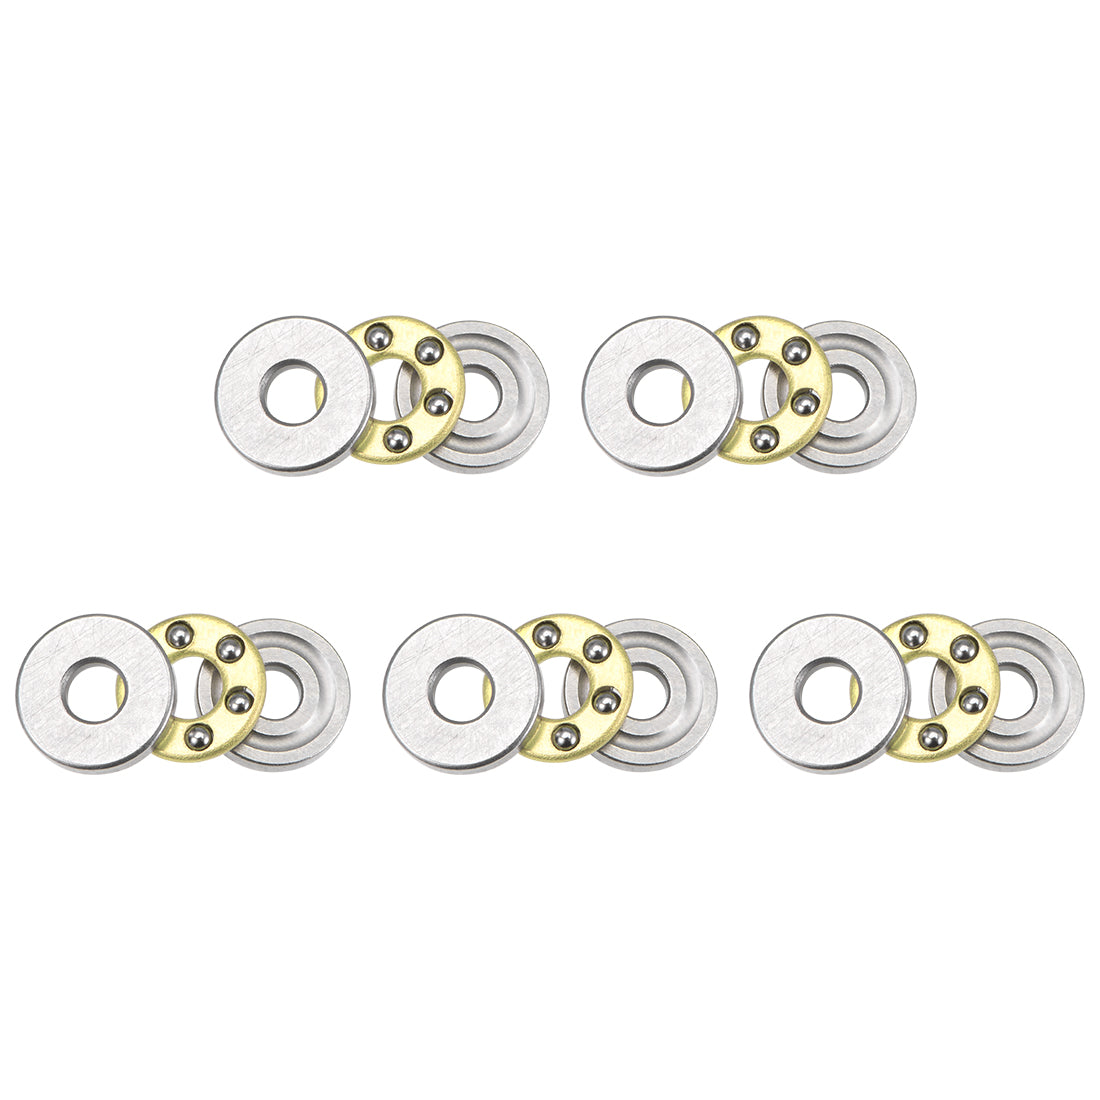 uxcell Uxcell F2-6M Miniature Thrust Ball Bearing 2x6x3mm Chrome Steel with Washer 5Pcs